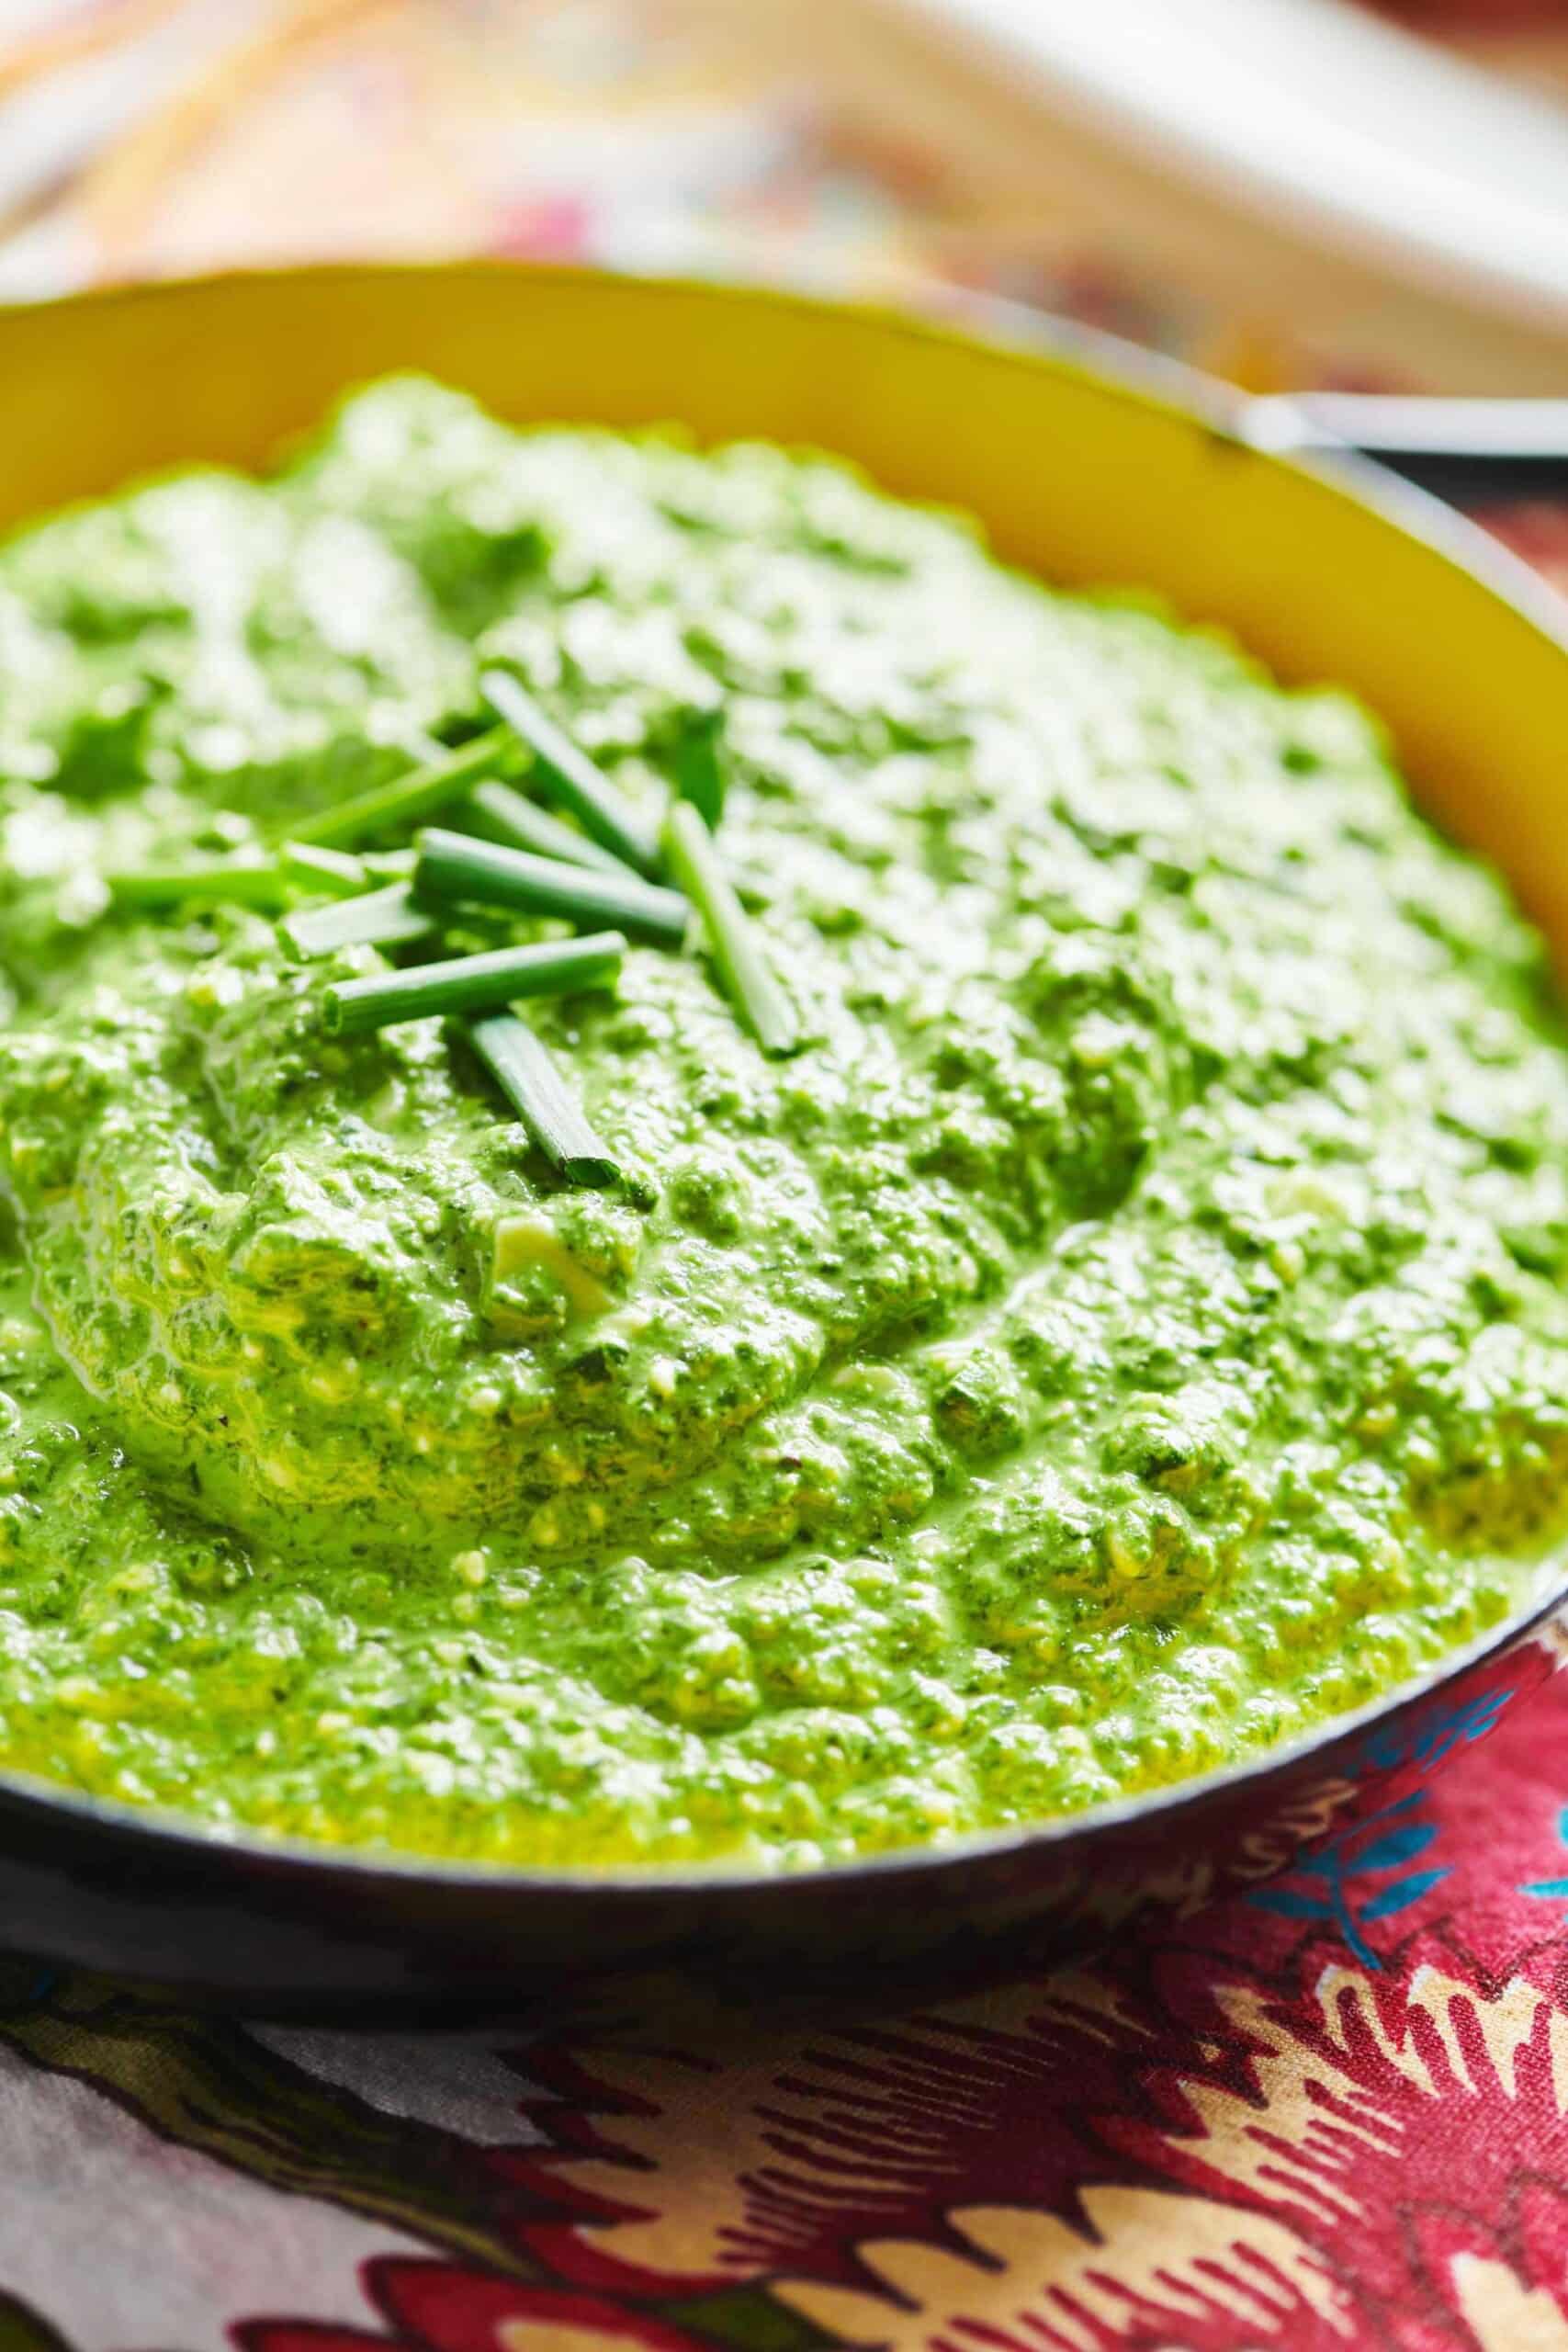 Parmesan Feta Spinach Dip in a bowl with chives on top